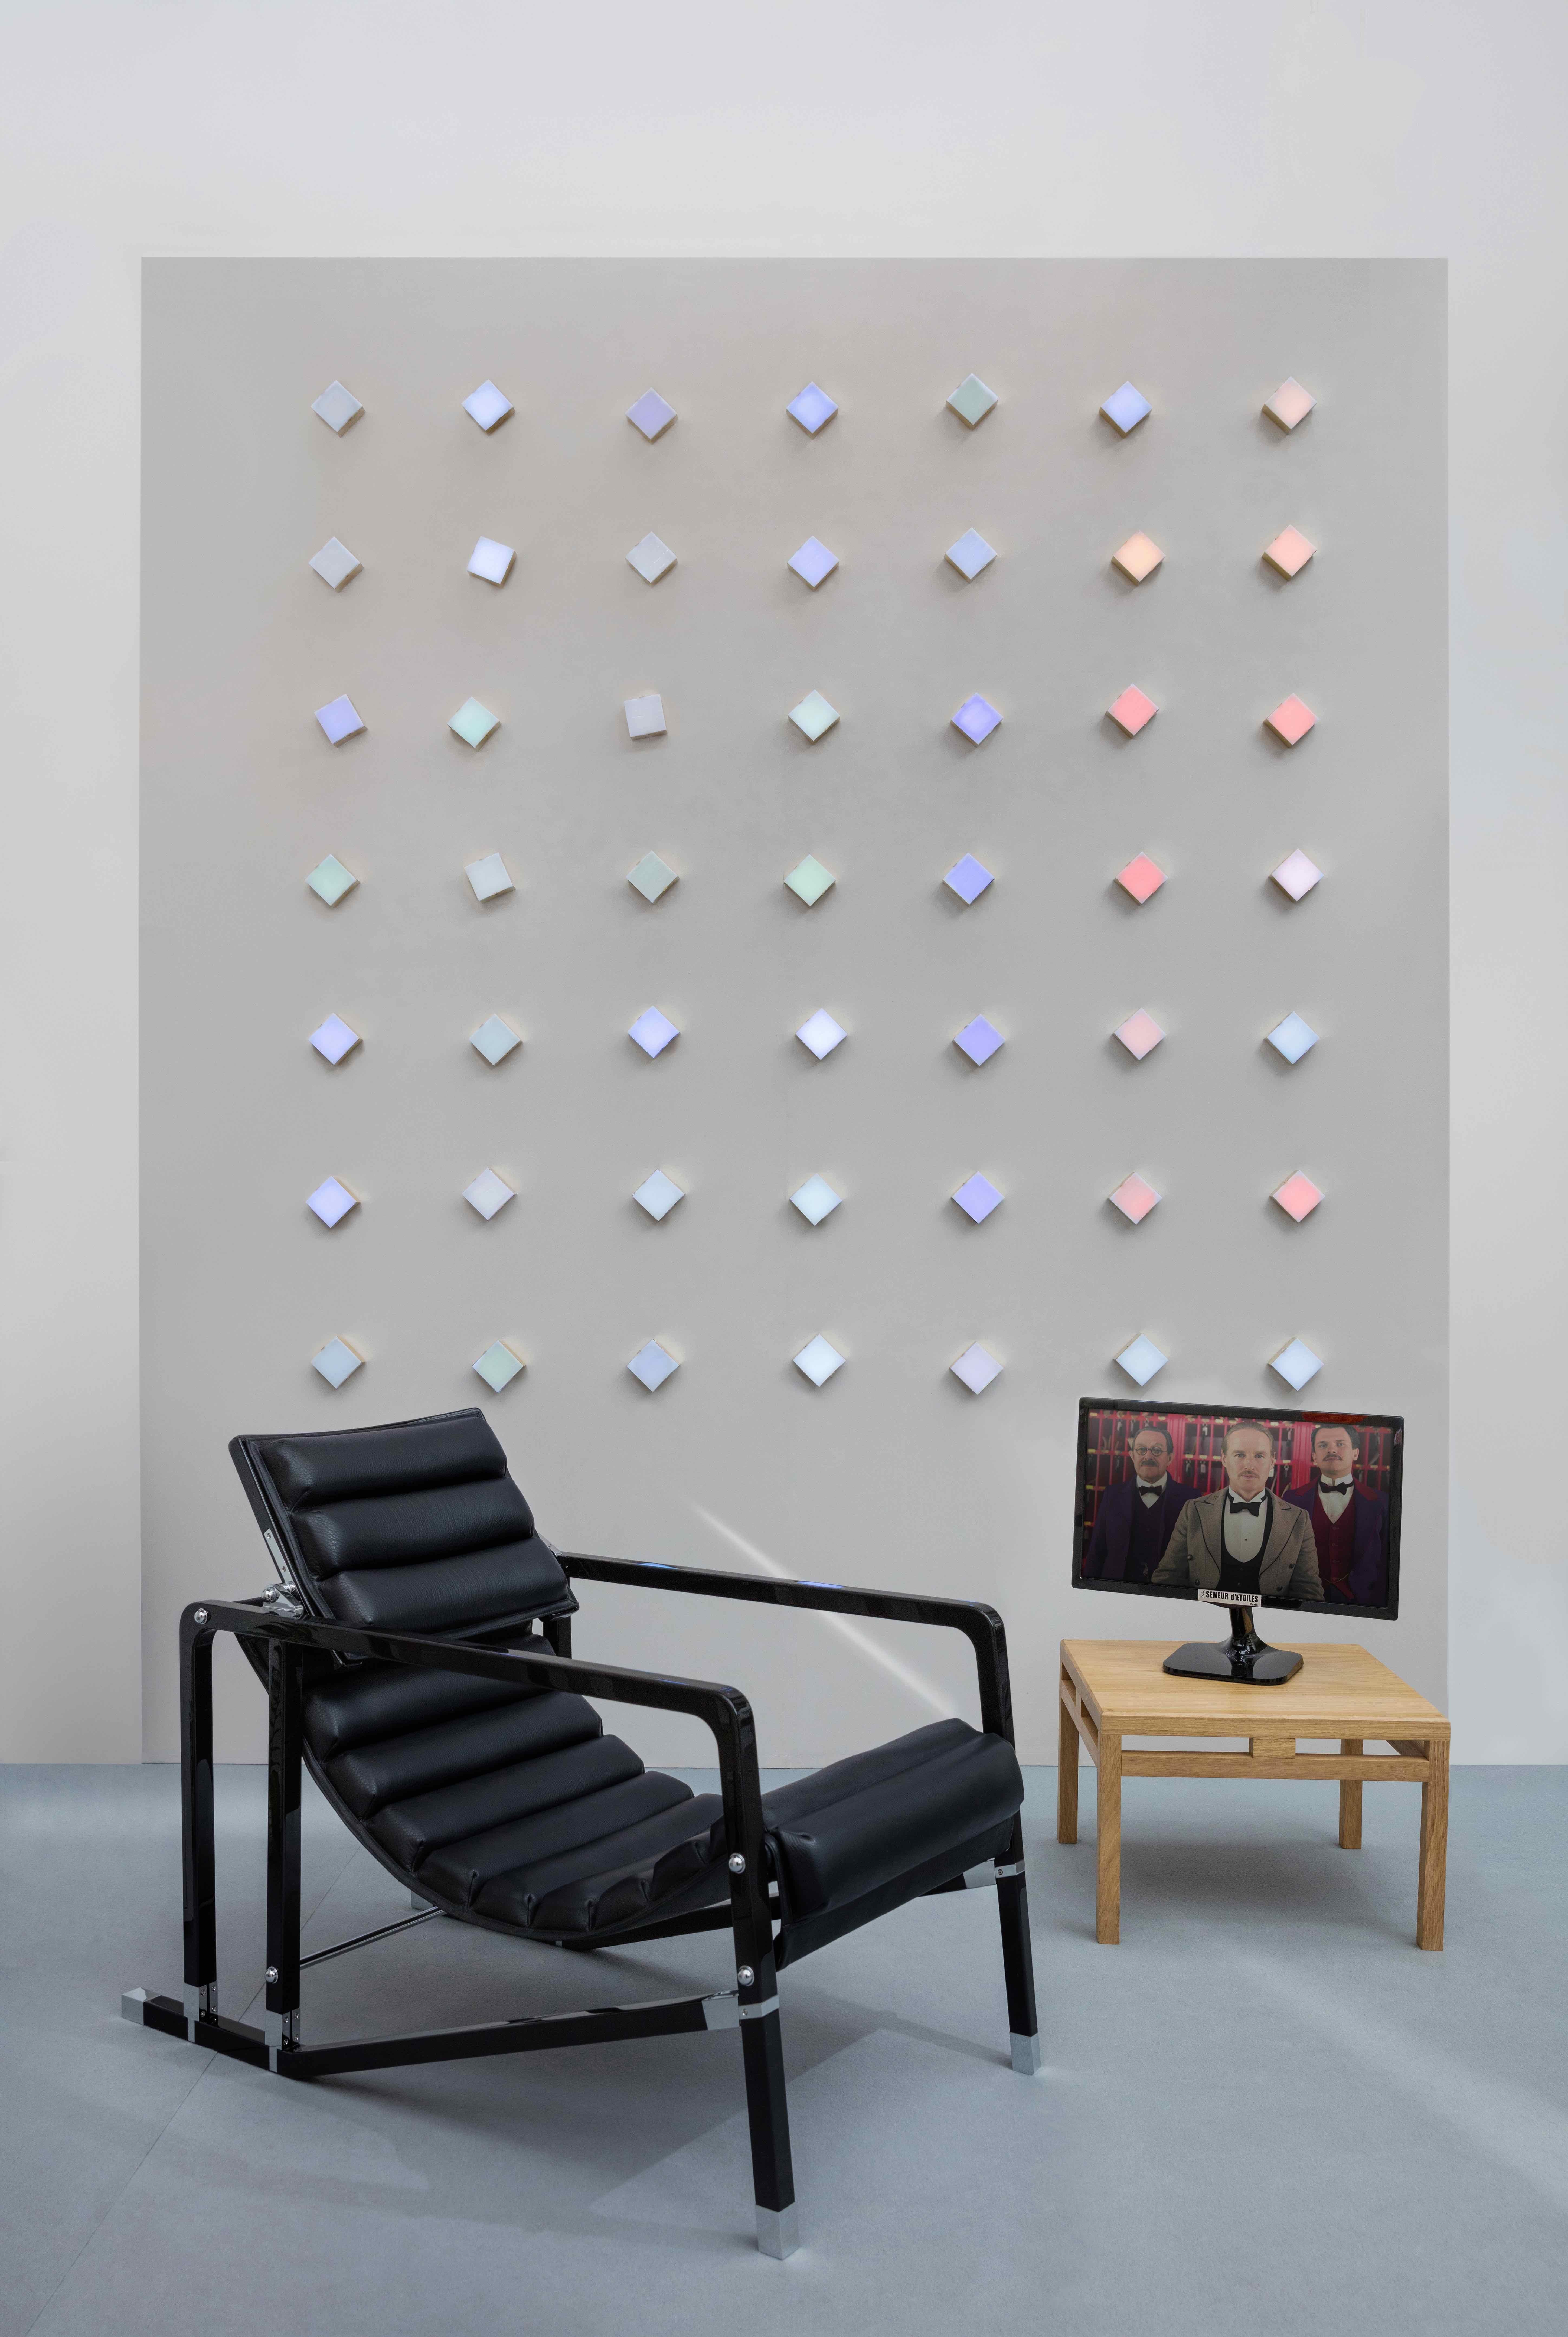 Essence des Choses wall art, Ludovic Clément d’Armont.
Dimensions: W 247 x D 7 x H 285 cm.
Materials: brass, glass, LEDs.

The wall reproduces / evokes the colored variations of the video you choose.

Every creation of Ludovic Clément d’Armont